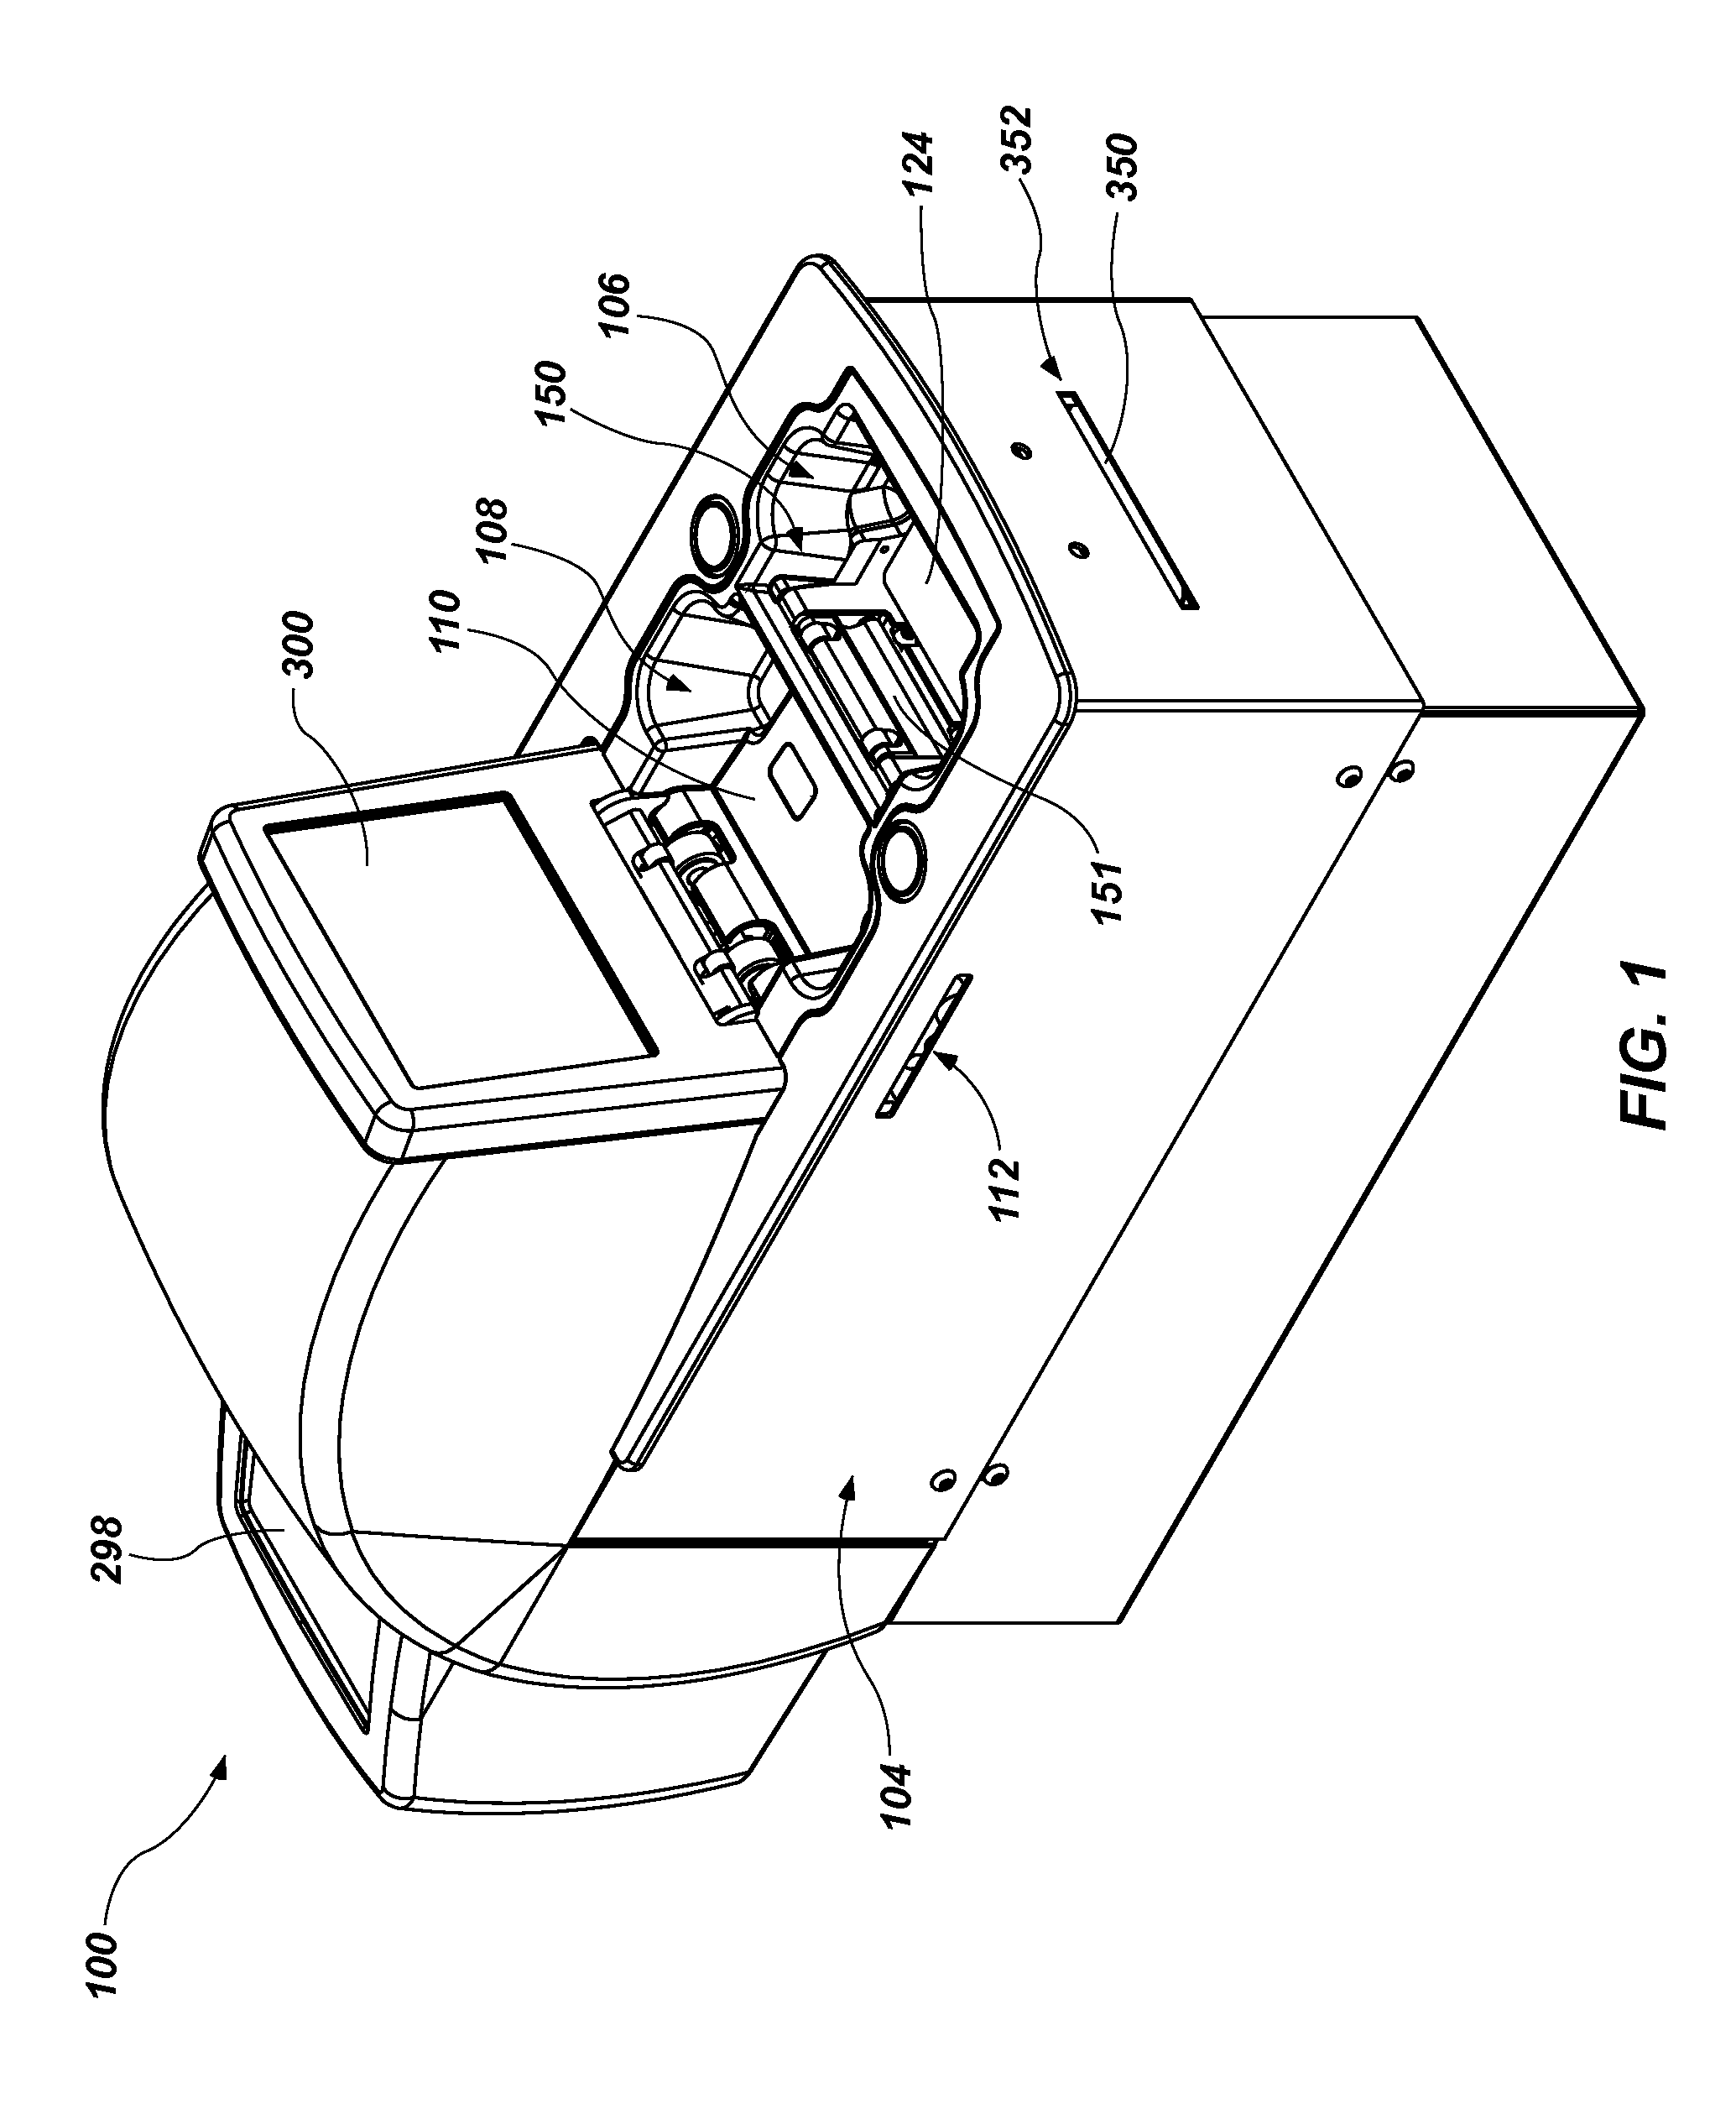 Hand-forming card shuffling apparatuses including multi-card storage compartments, and related methods